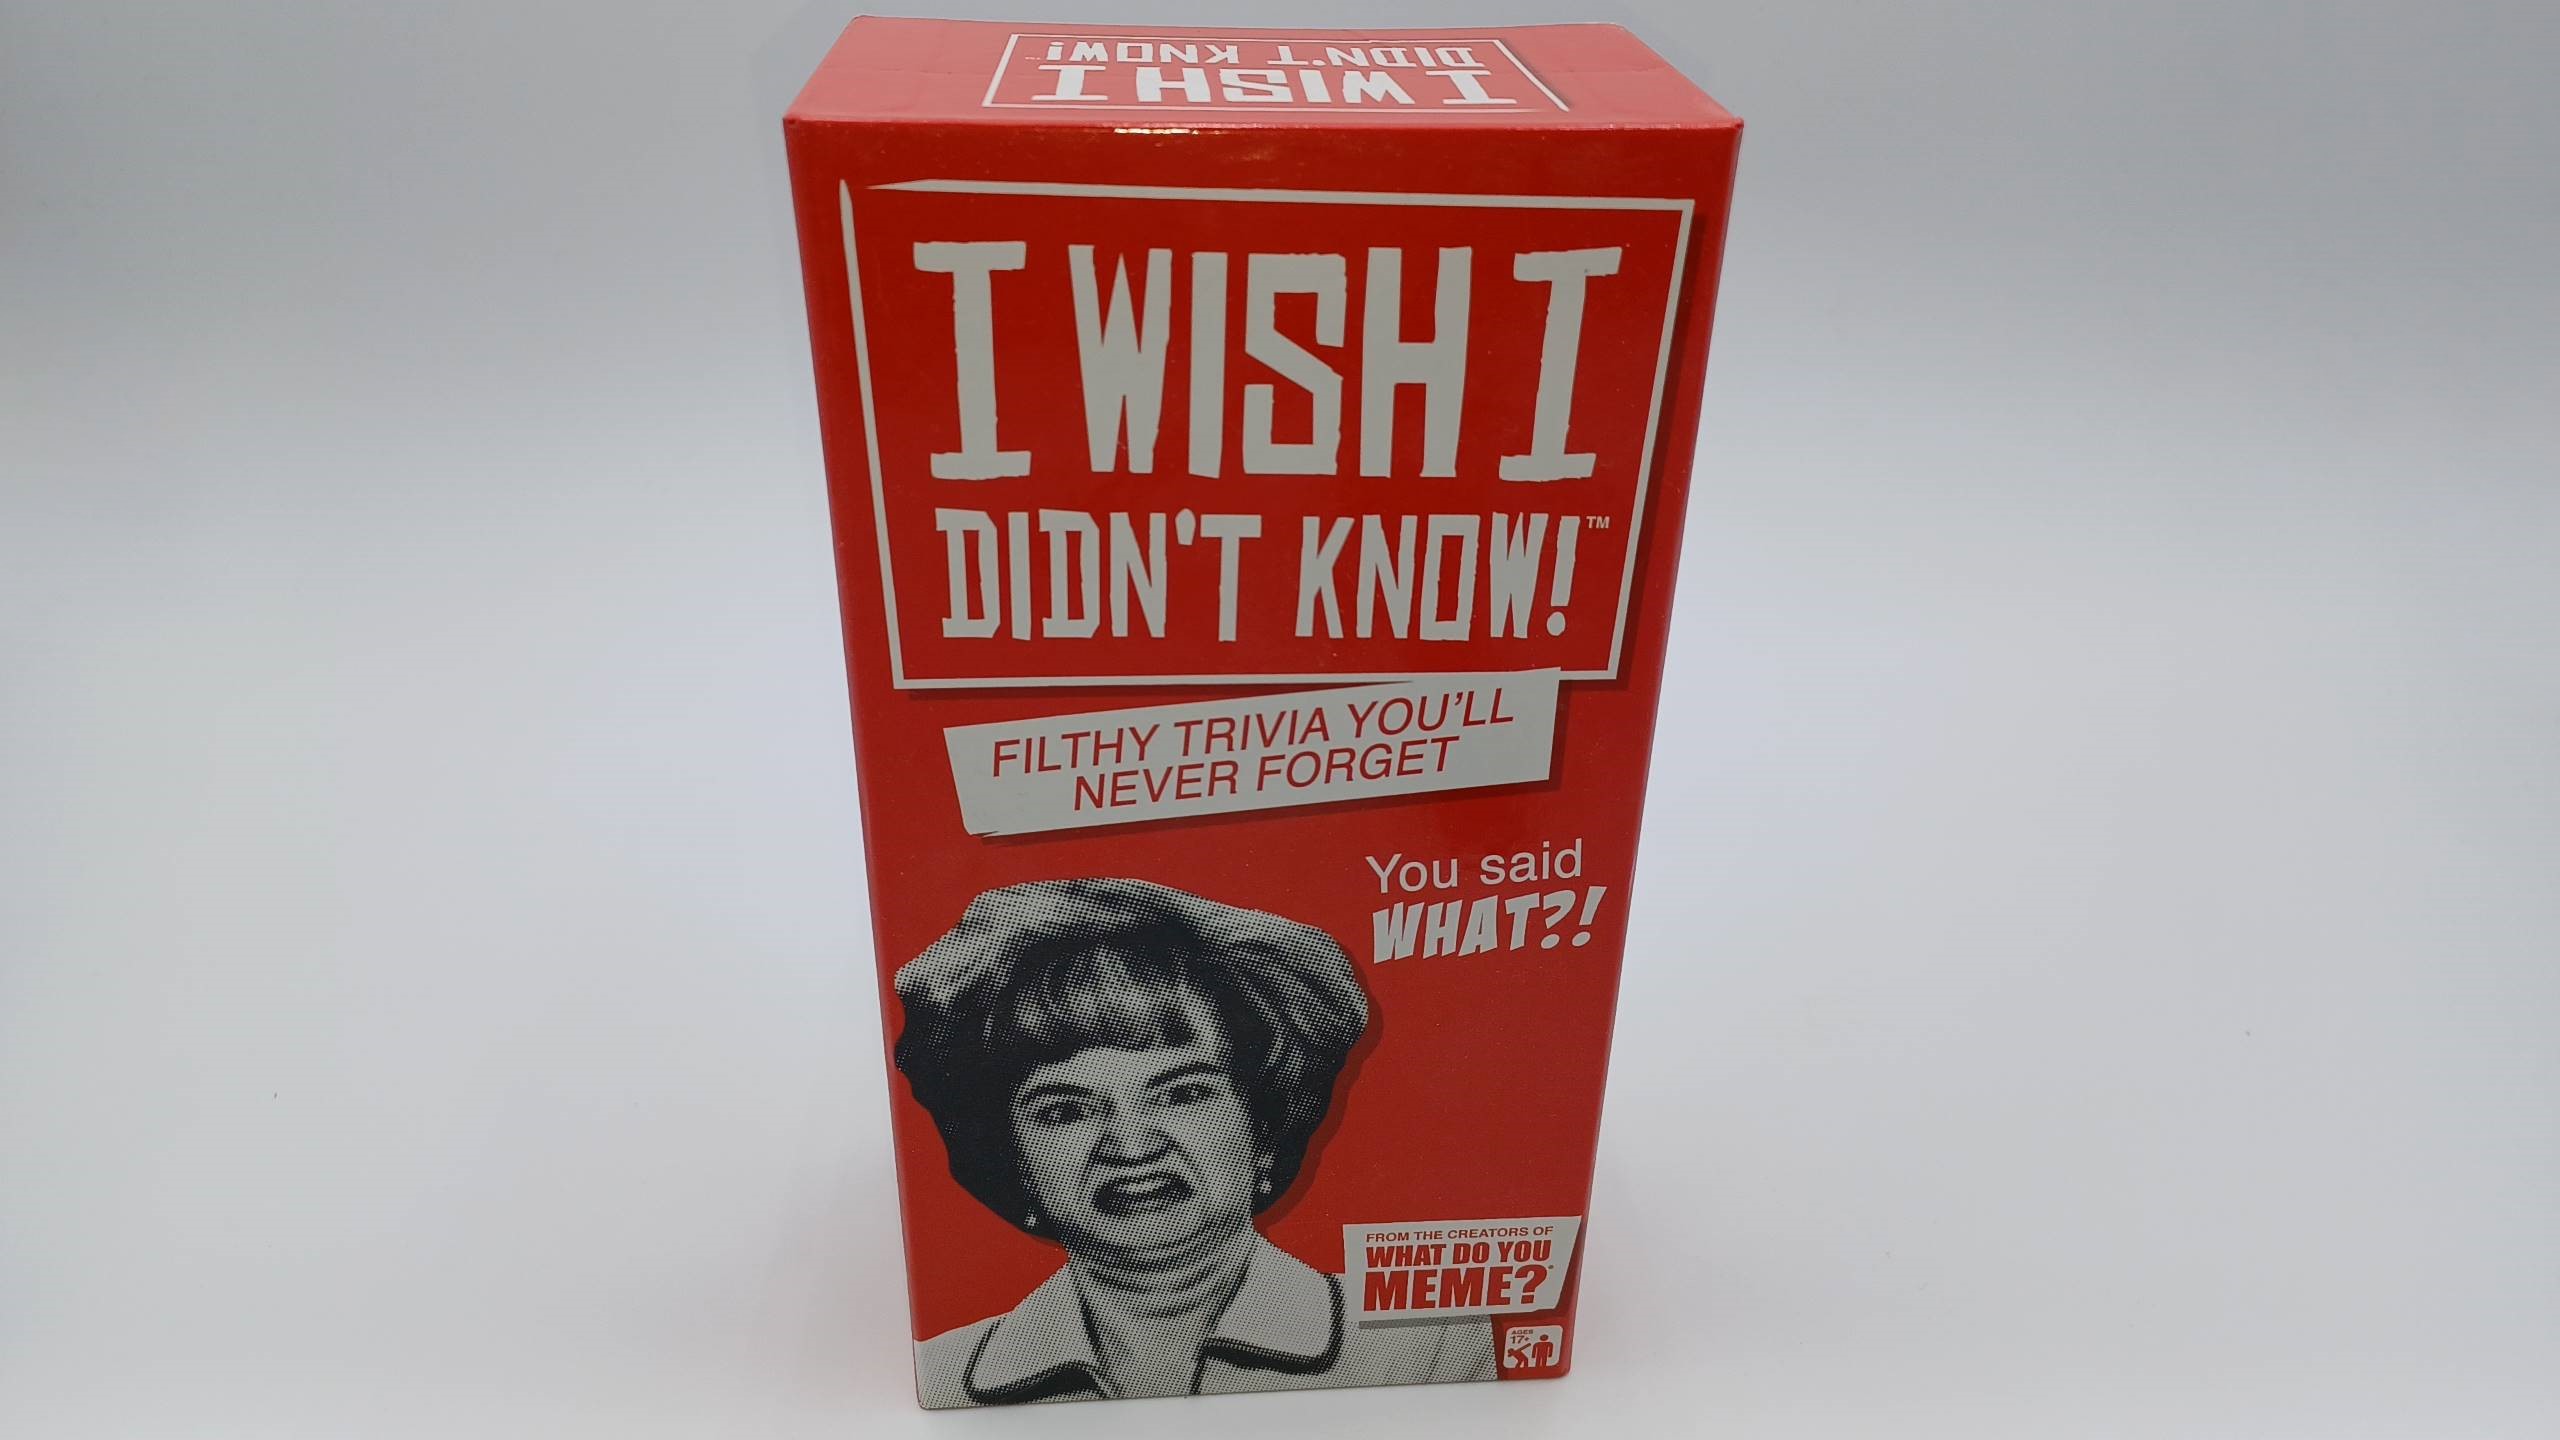 Box for I Wish I Didn't Know